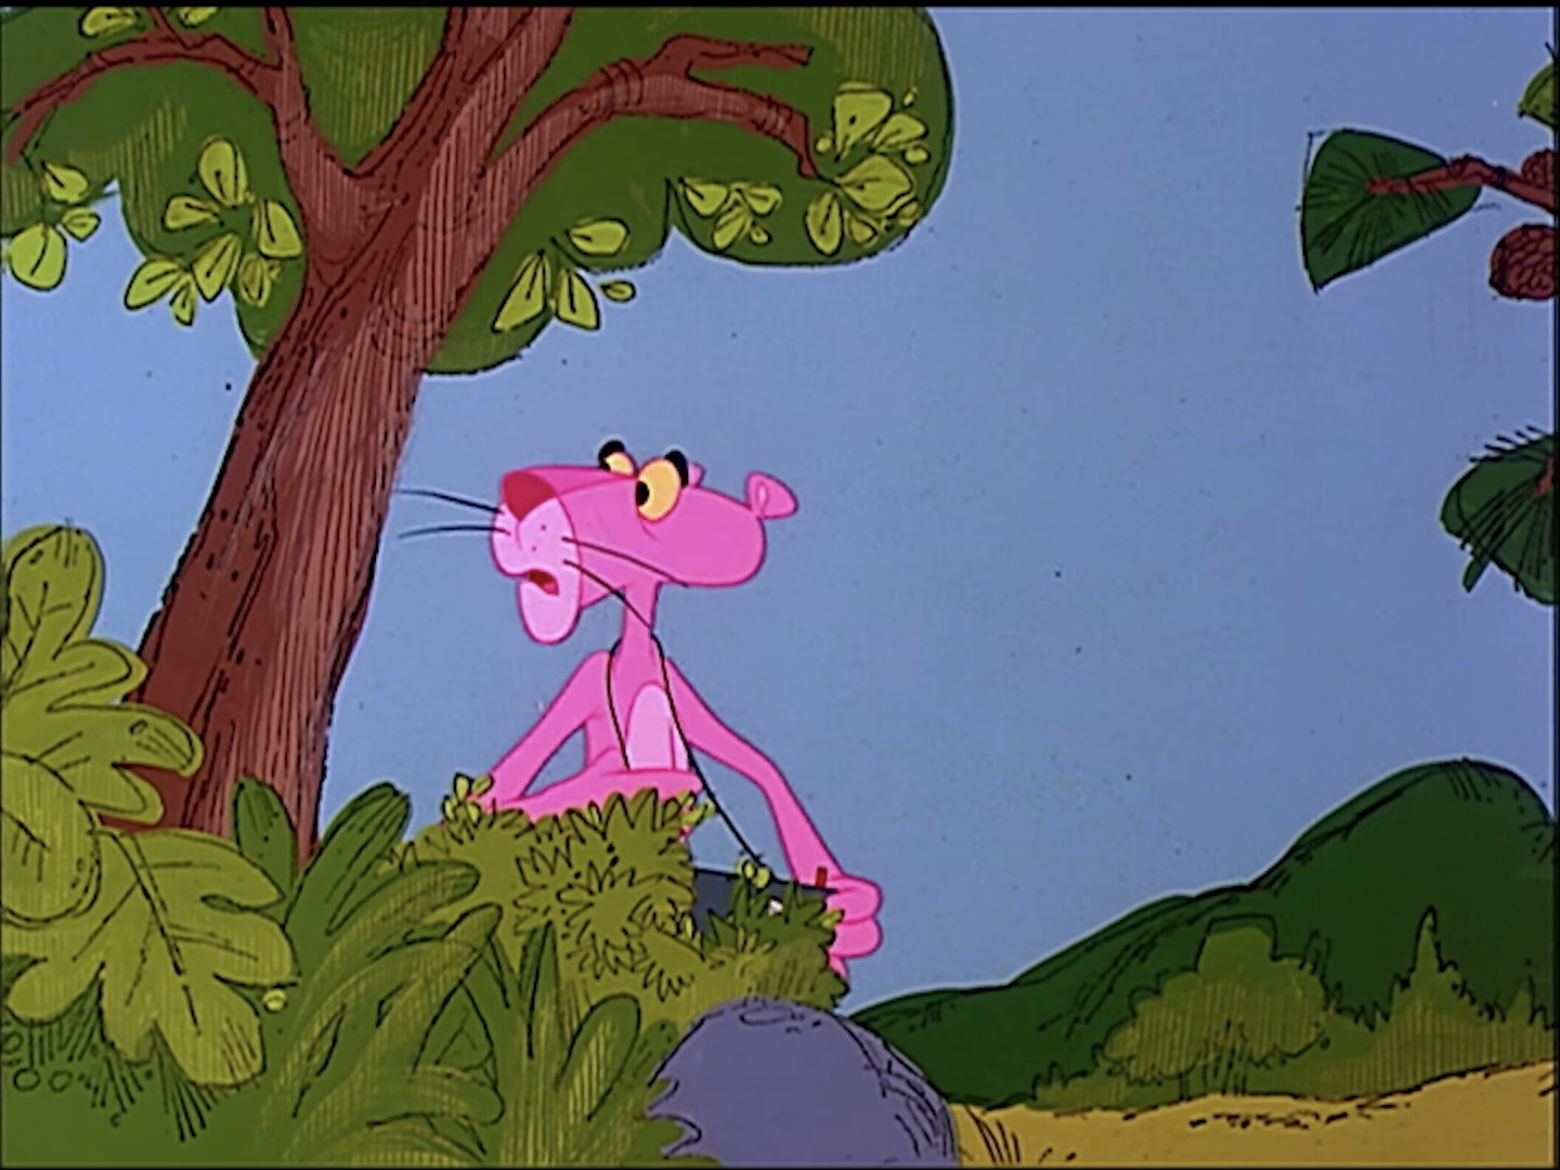 A cartoon character is standing in the woods - Pink Panther